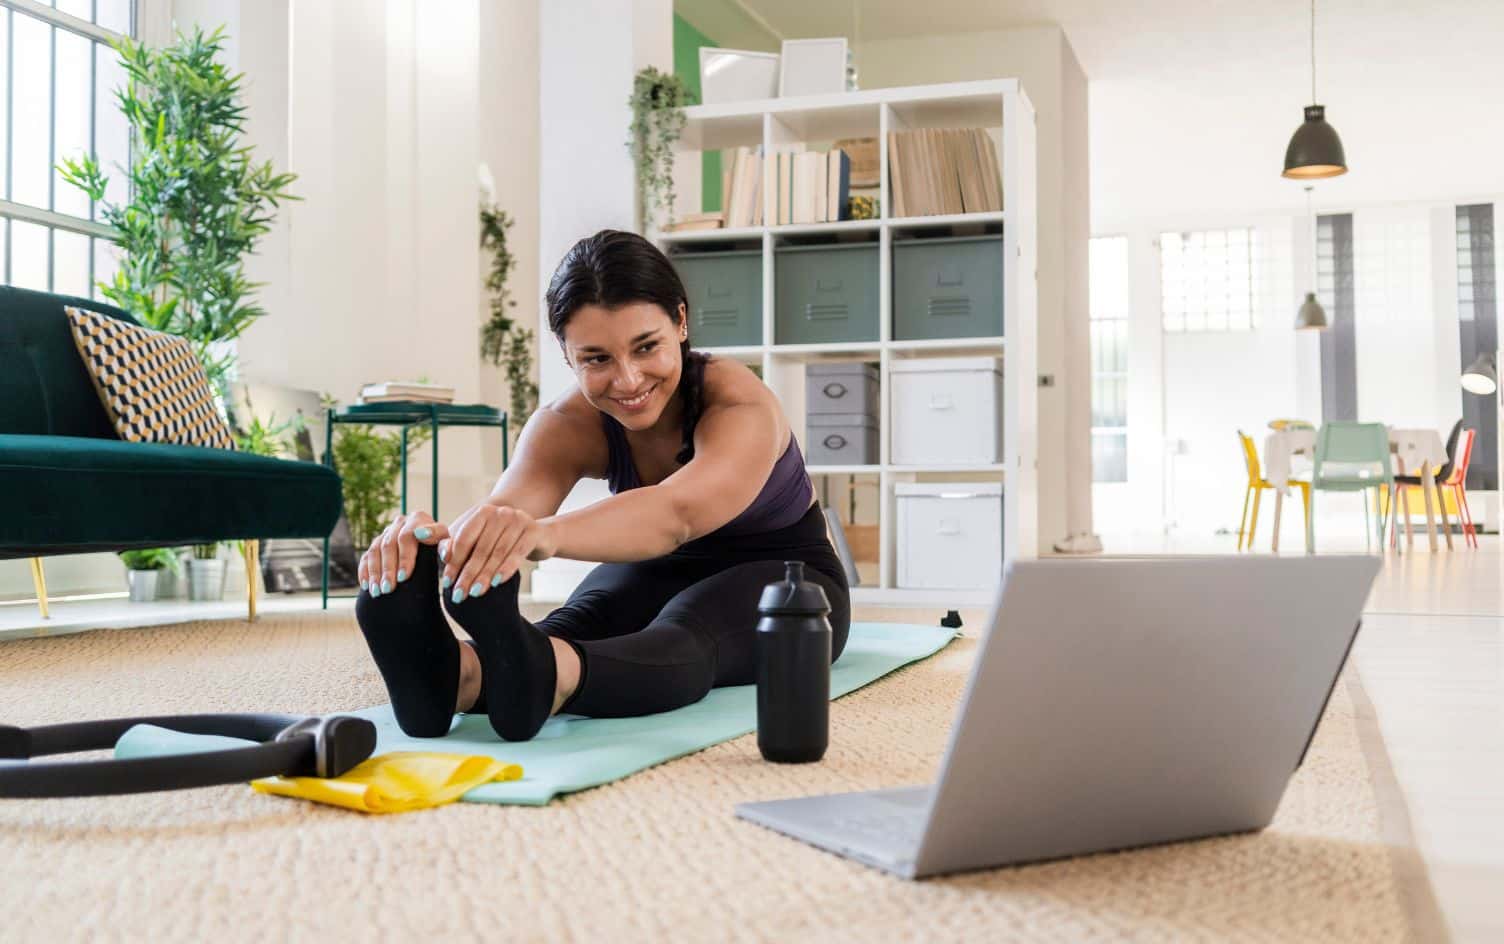 The New Era of On-Demand, Home Workouts